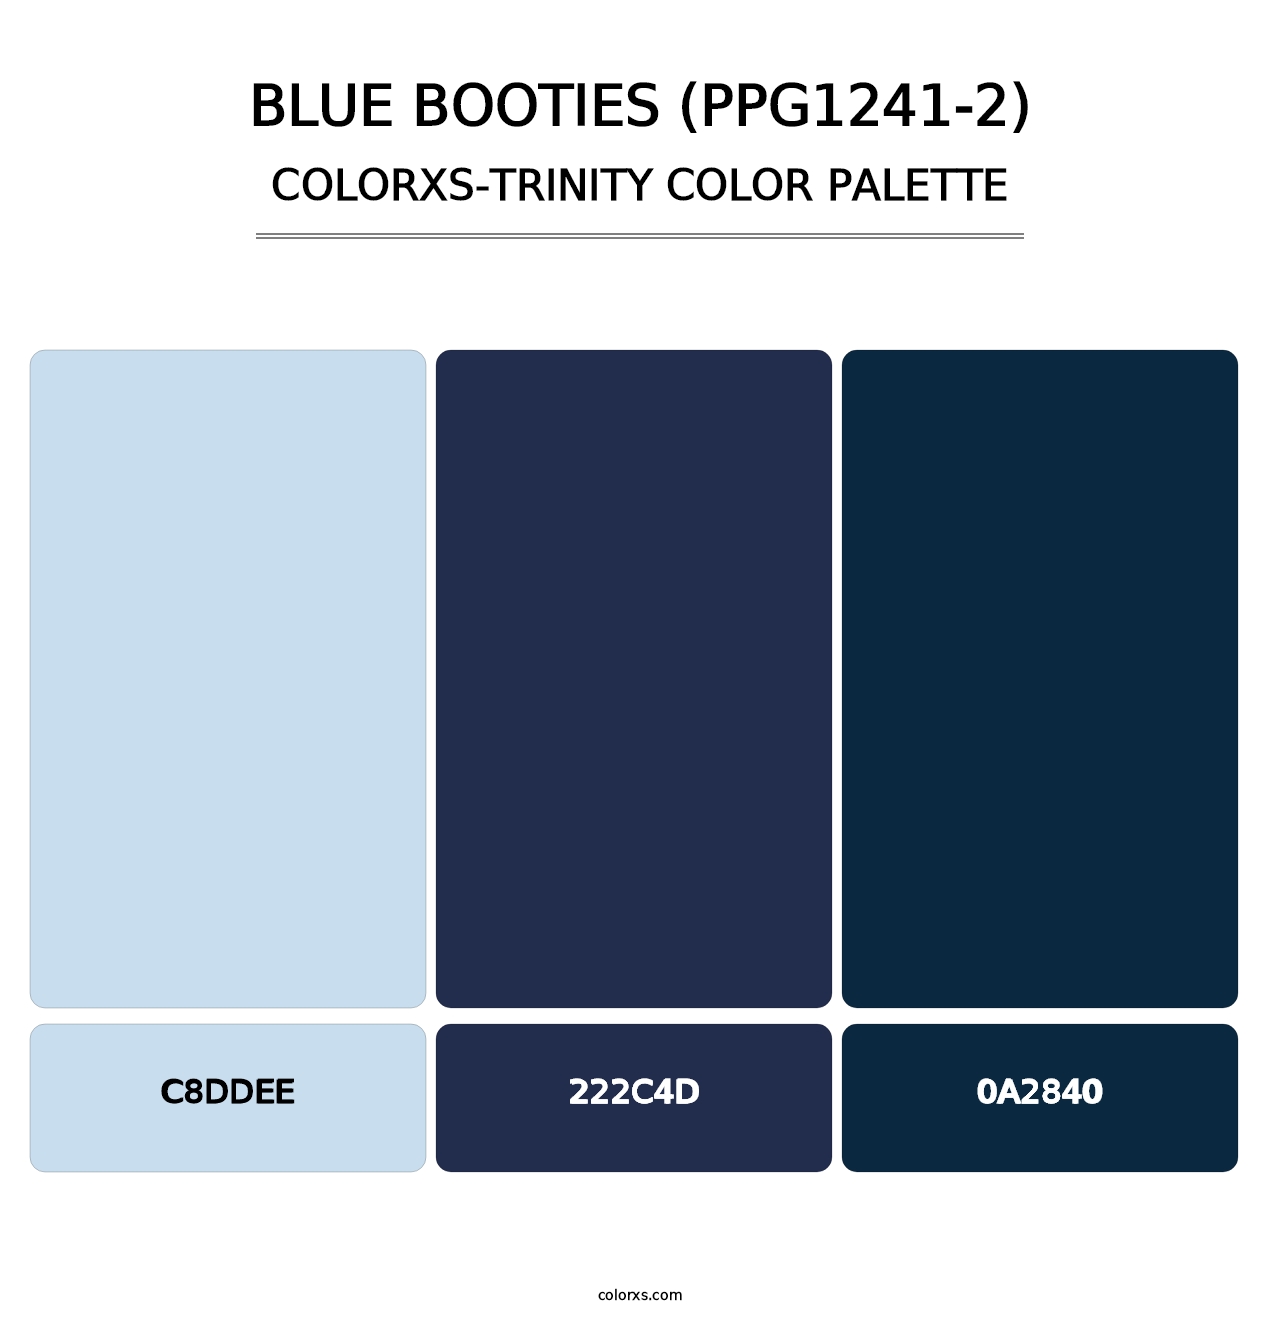 Blue Booties (PPG1241-2) - Colorxs Trinity Palette